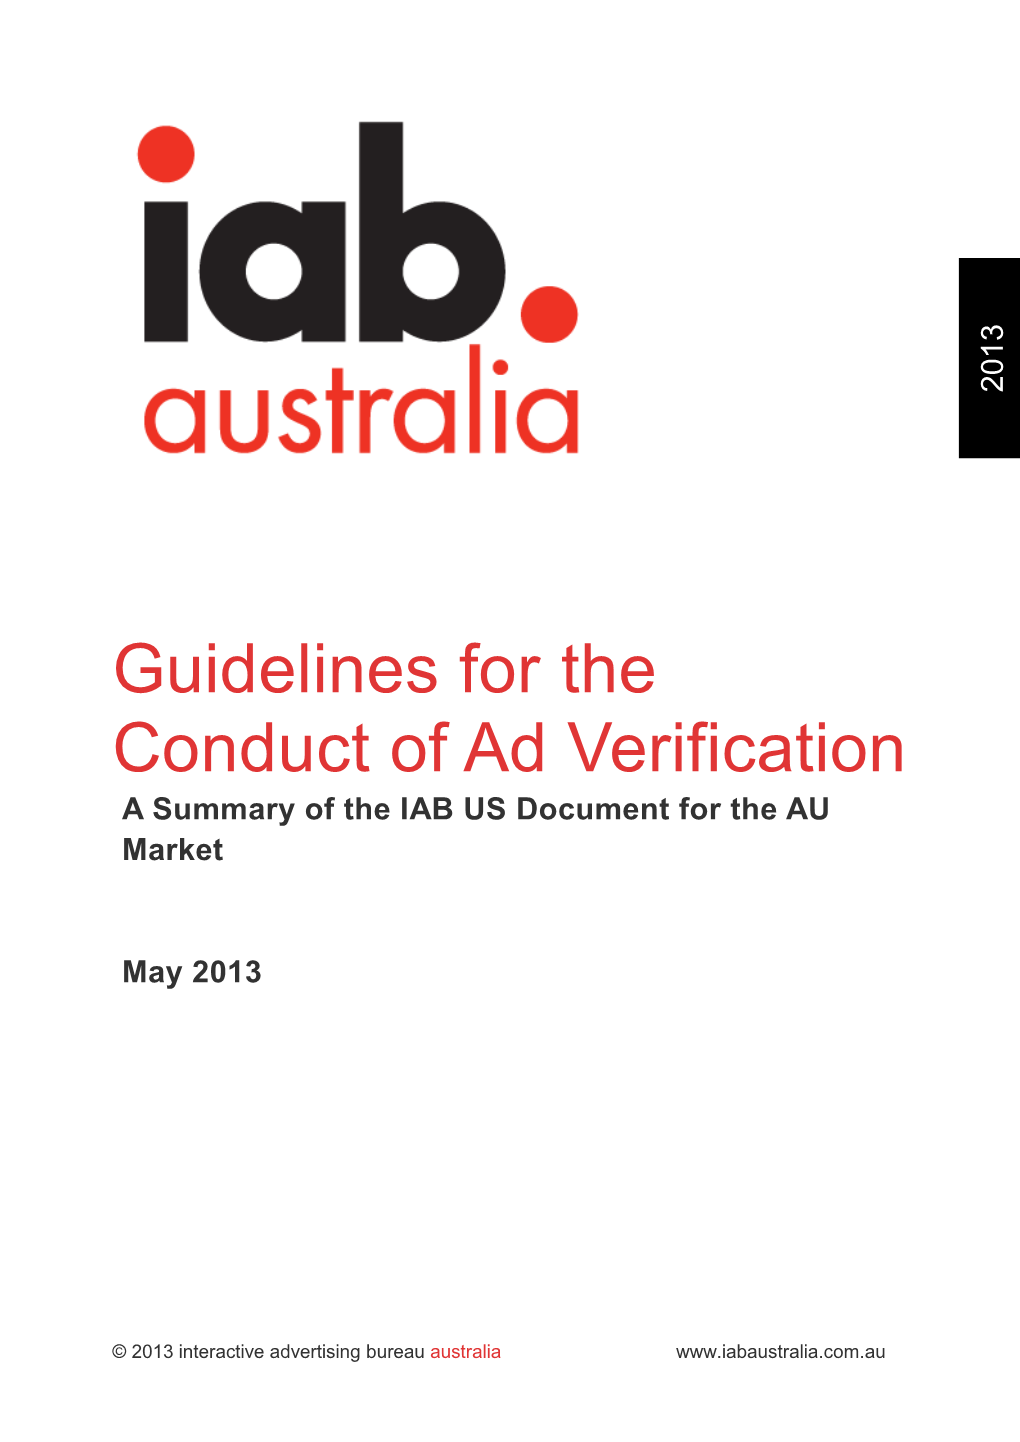 Guidelines for the Conduct of Ad Verification a Summary of the IAB US Document for the AU Market